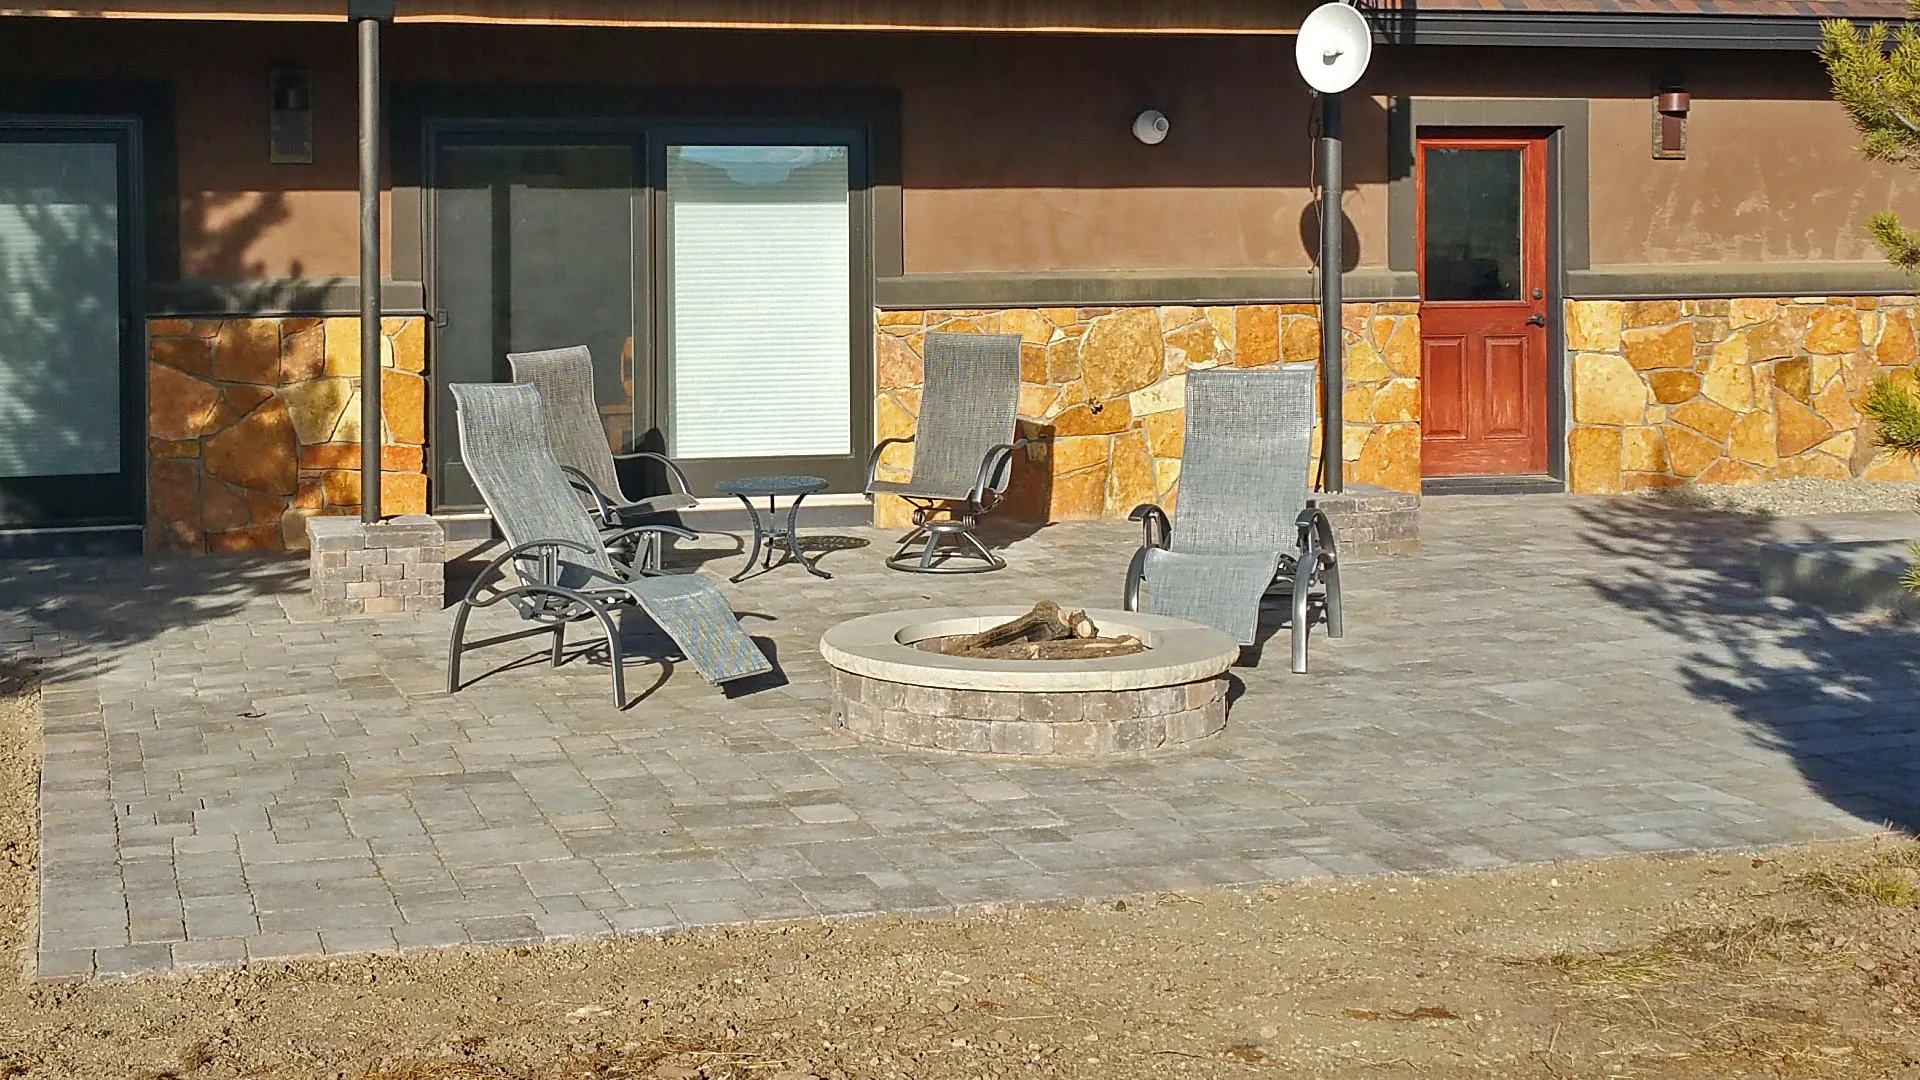  A new paver patio that was installed by our team of professionals in the back yard of a home in Fraser, CO.